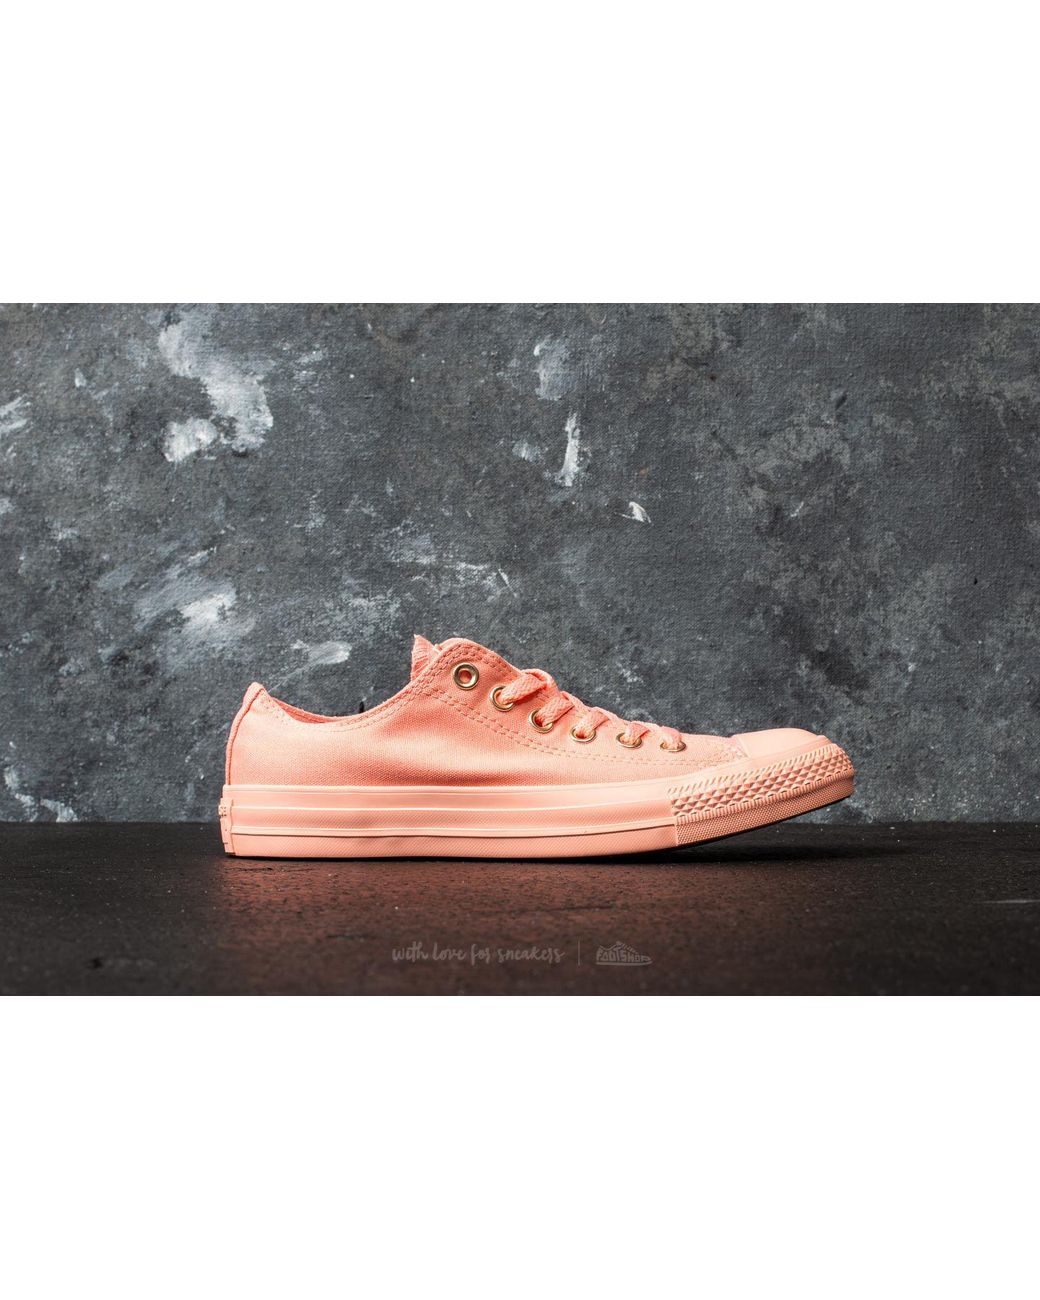 Converse Chuck Taylor All Star Ox Sneakers - Pale Coral/ Gold